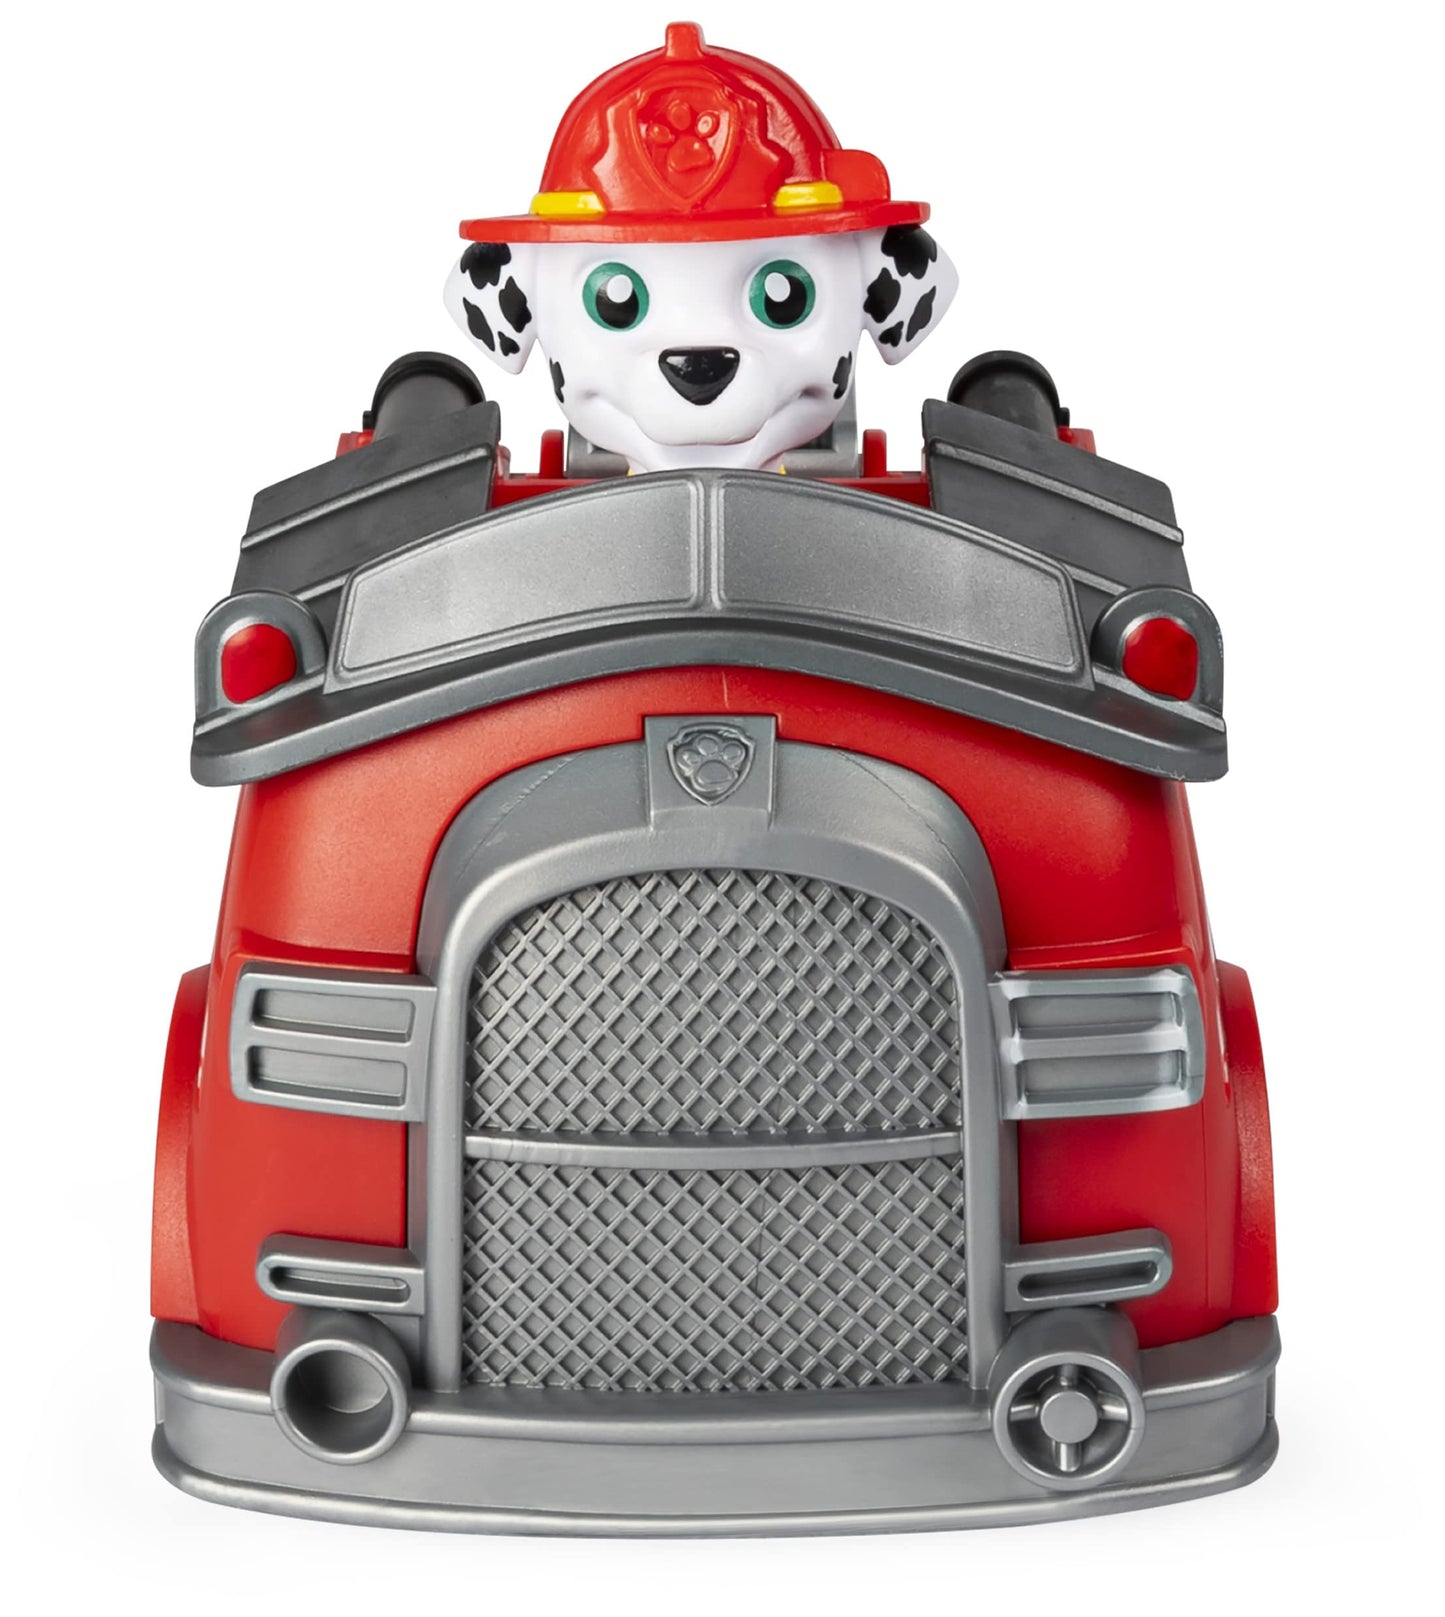 Paw Patrol, Marshall Remote Control Fire Truck with 2-Way Steering, for Kids Aged 3 and Up